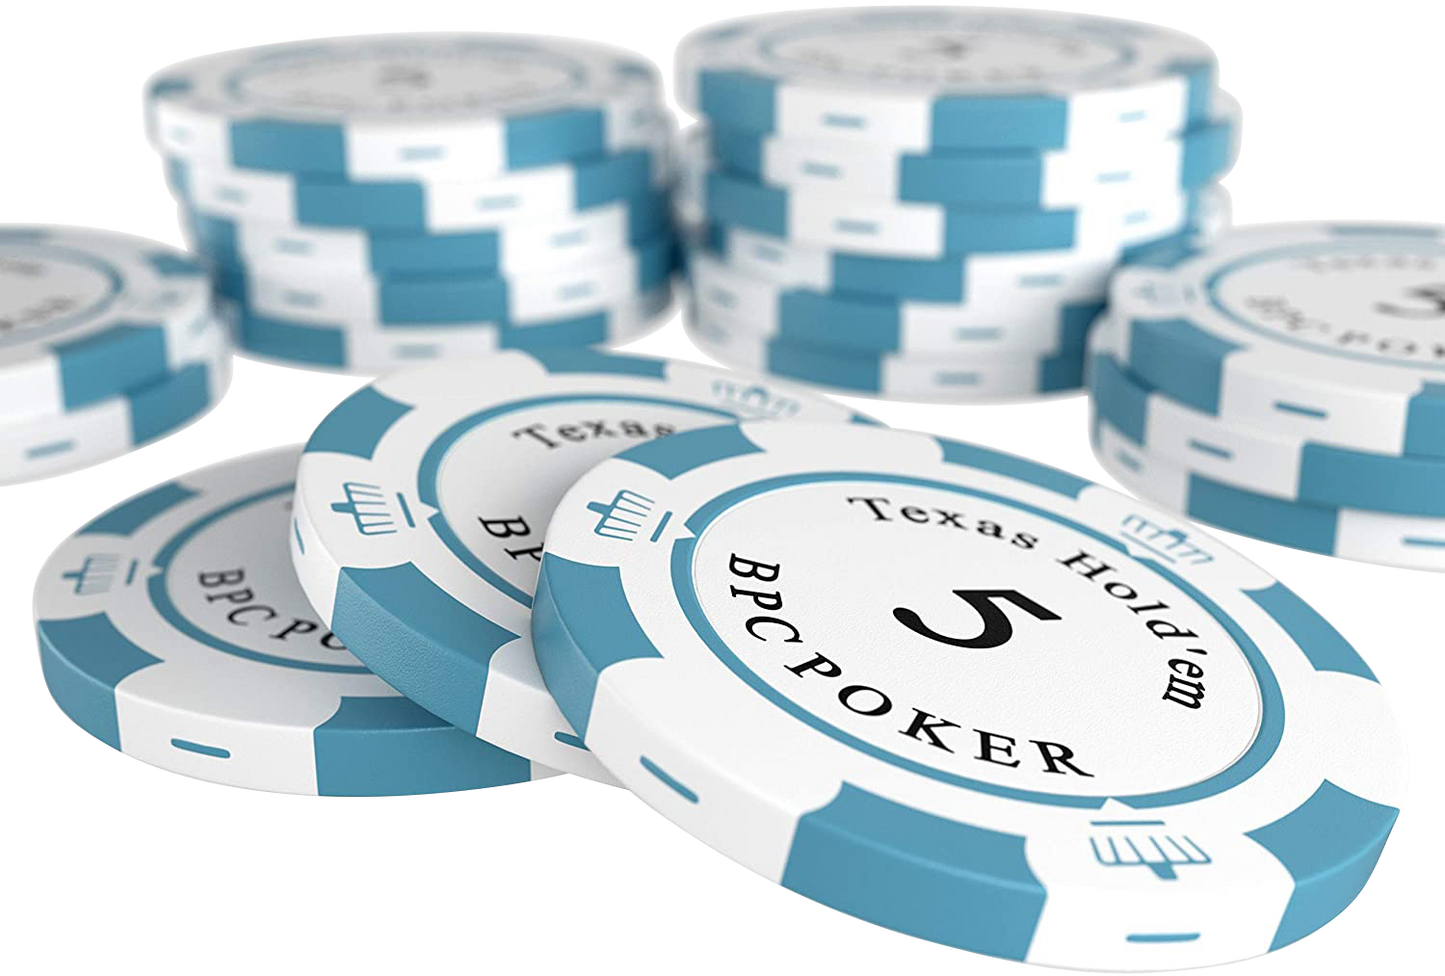 Clay Poker Chips "Carmela" with Values ​​- Roll of 25